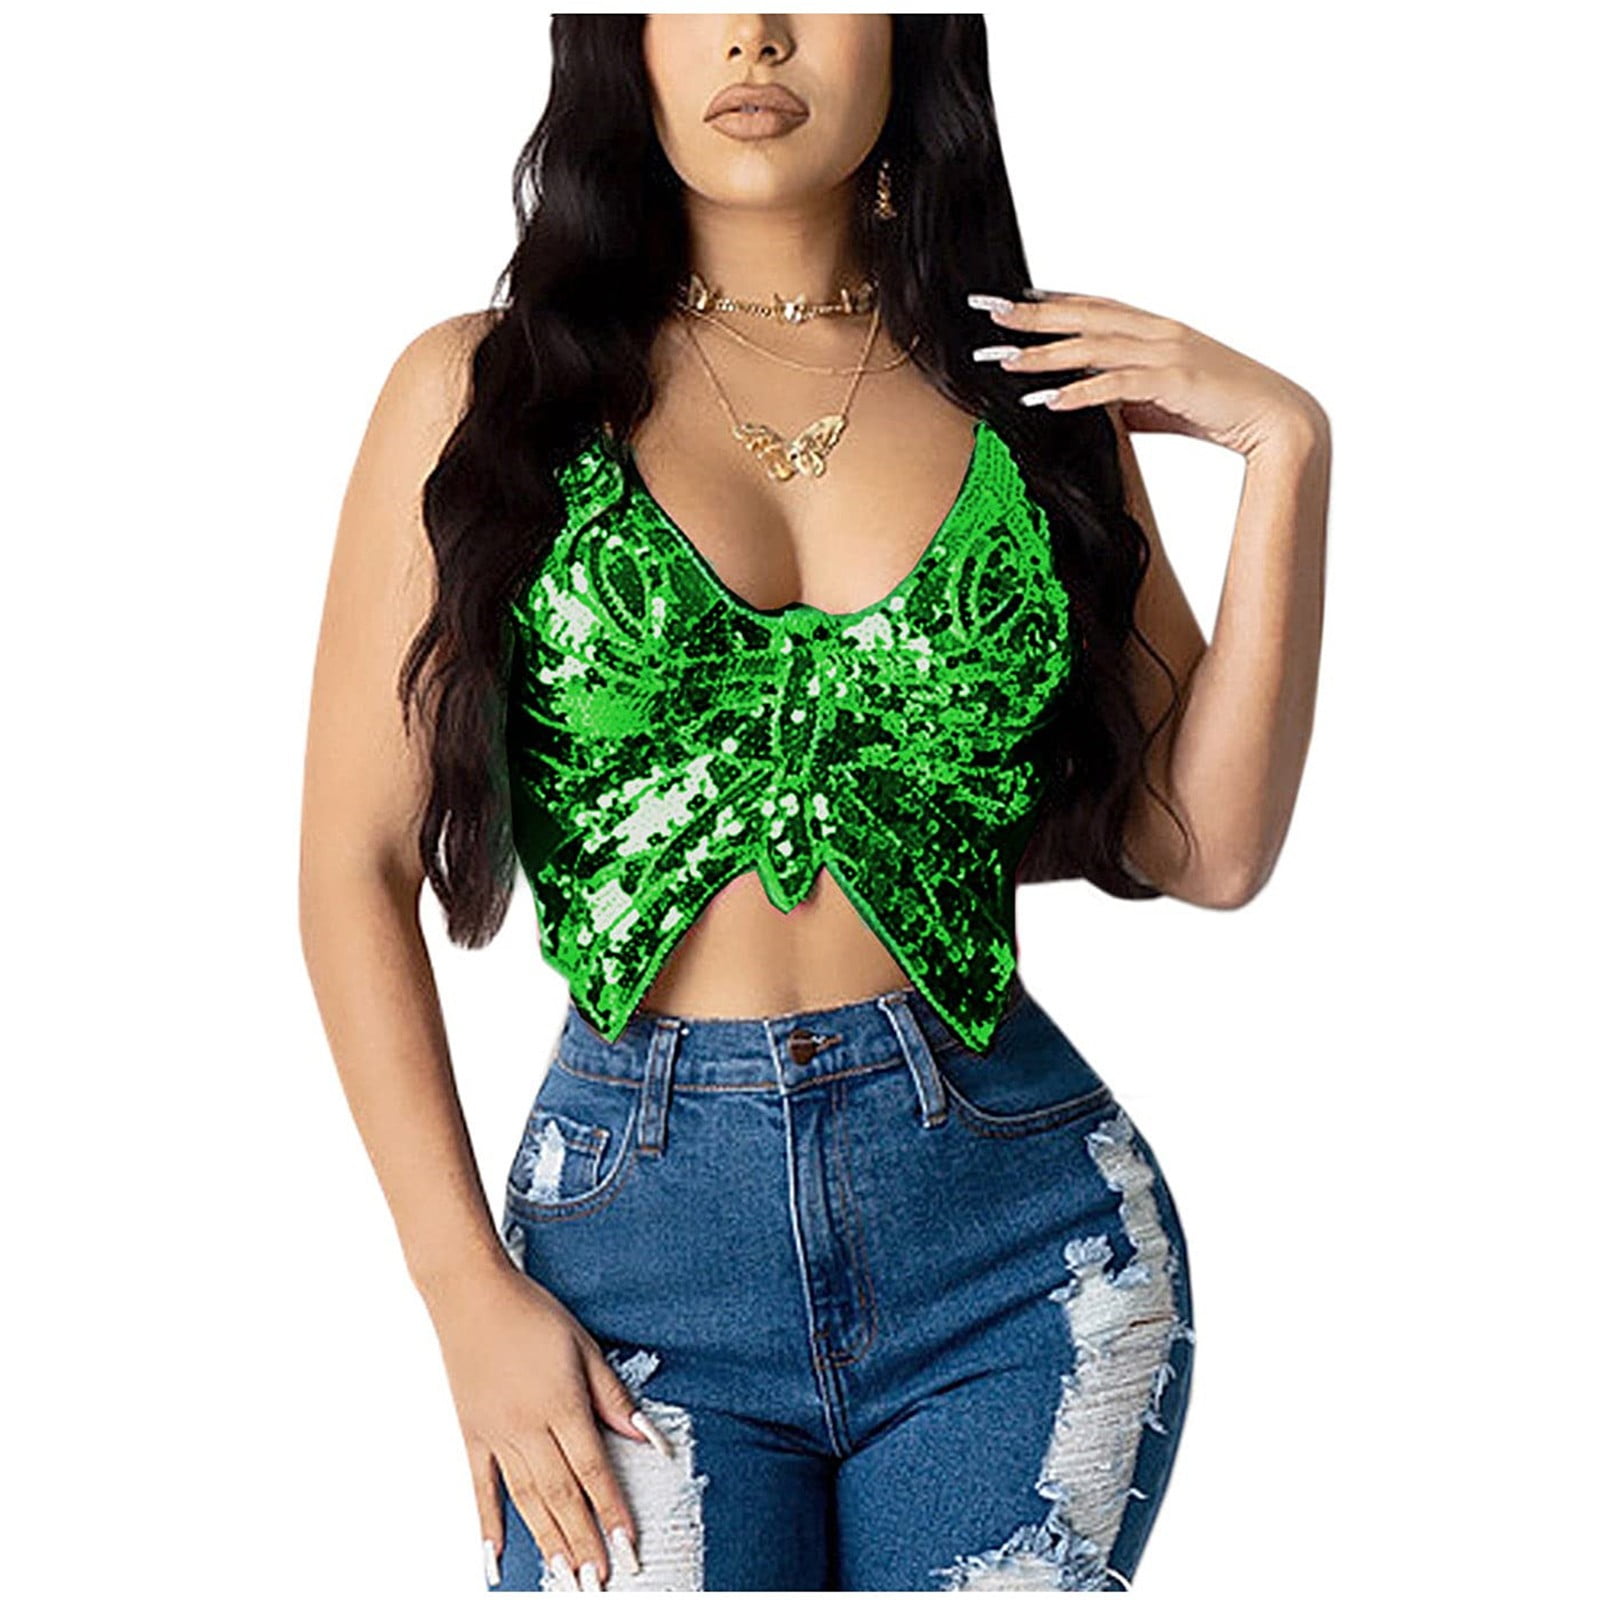 iOPQO Mardi Gras Outfit Mardi Gras Shirts Women's Tanks Women's Sparkly  Sequin Crop Top Bandage Bra Belly Dance Vest Tank Costume Outfits Green One  Size 